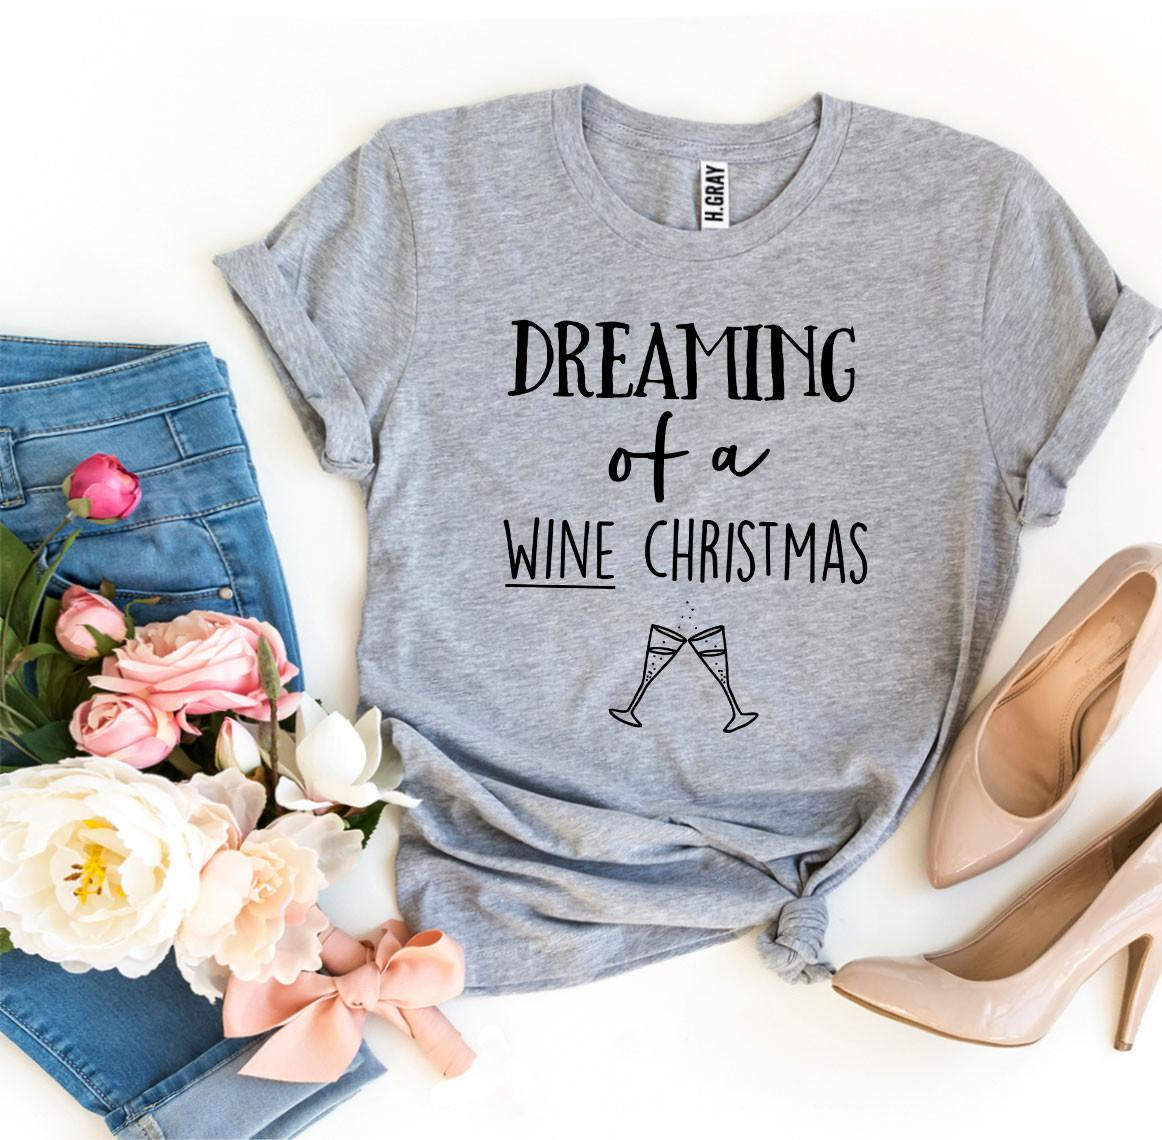 "Dreaming Of A Wine Christmas" Funny T-shirt